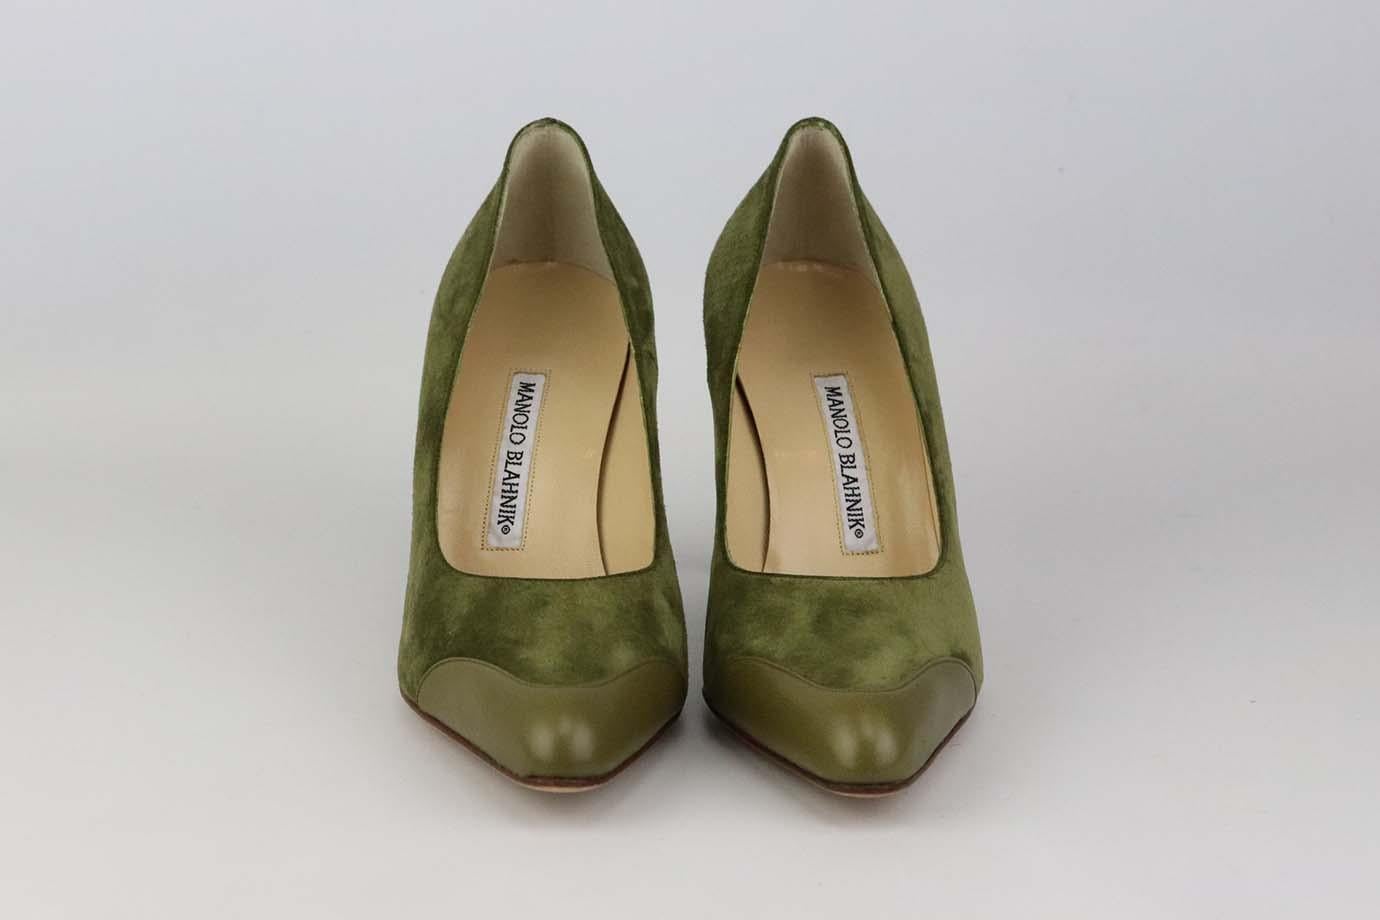 These Vintage pumps by Manolo Blahnik are a classic style that will never date, made in Italy from supple khaki suede and leather, they have rounded toes and comfortable 63 mm heels to take you from morning meetings to dinner with friends. Heel